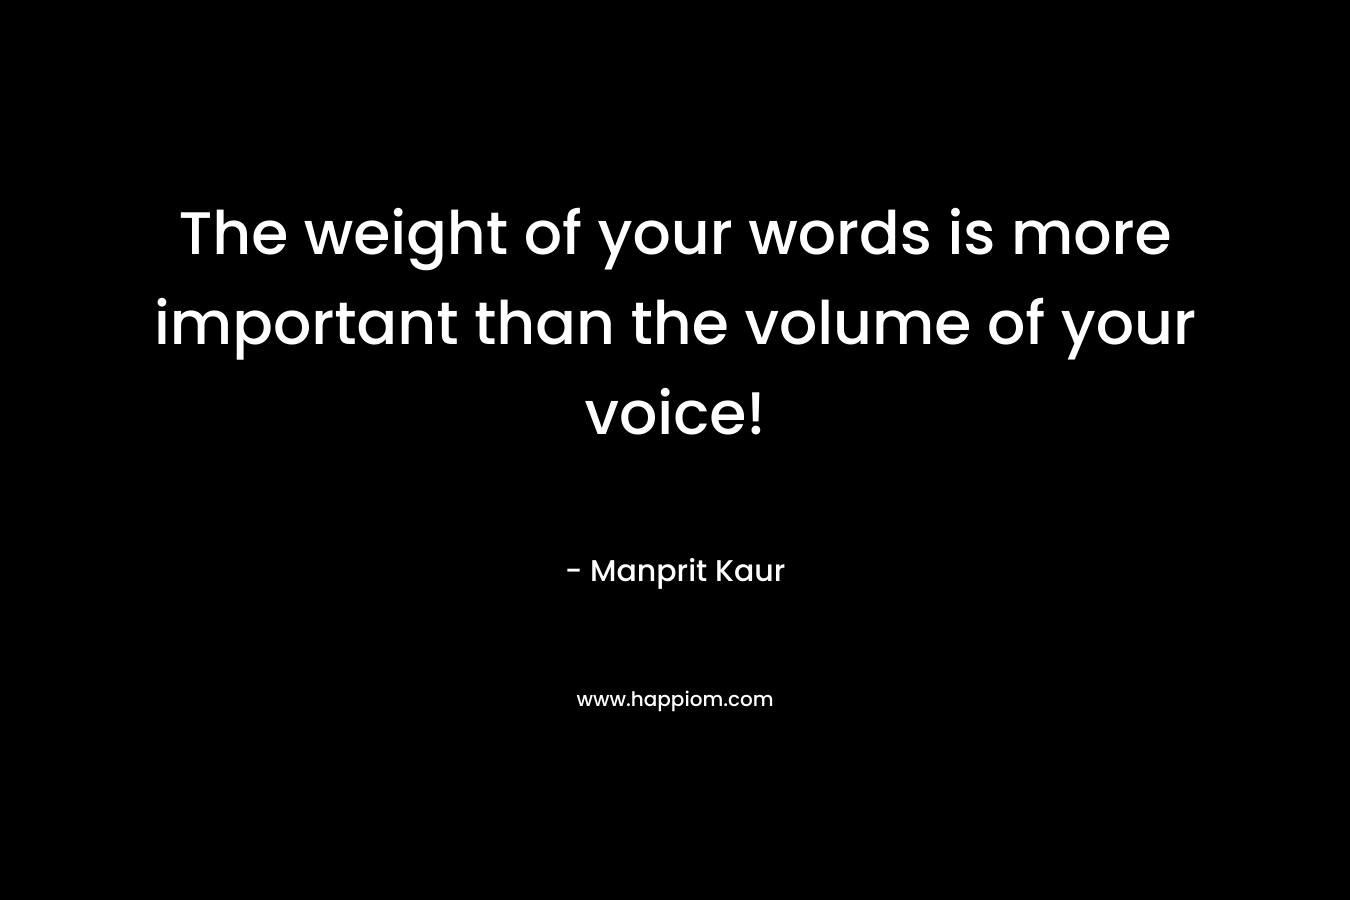 The weight of your words is more important than the volume of your voice! – Manprit Kaur